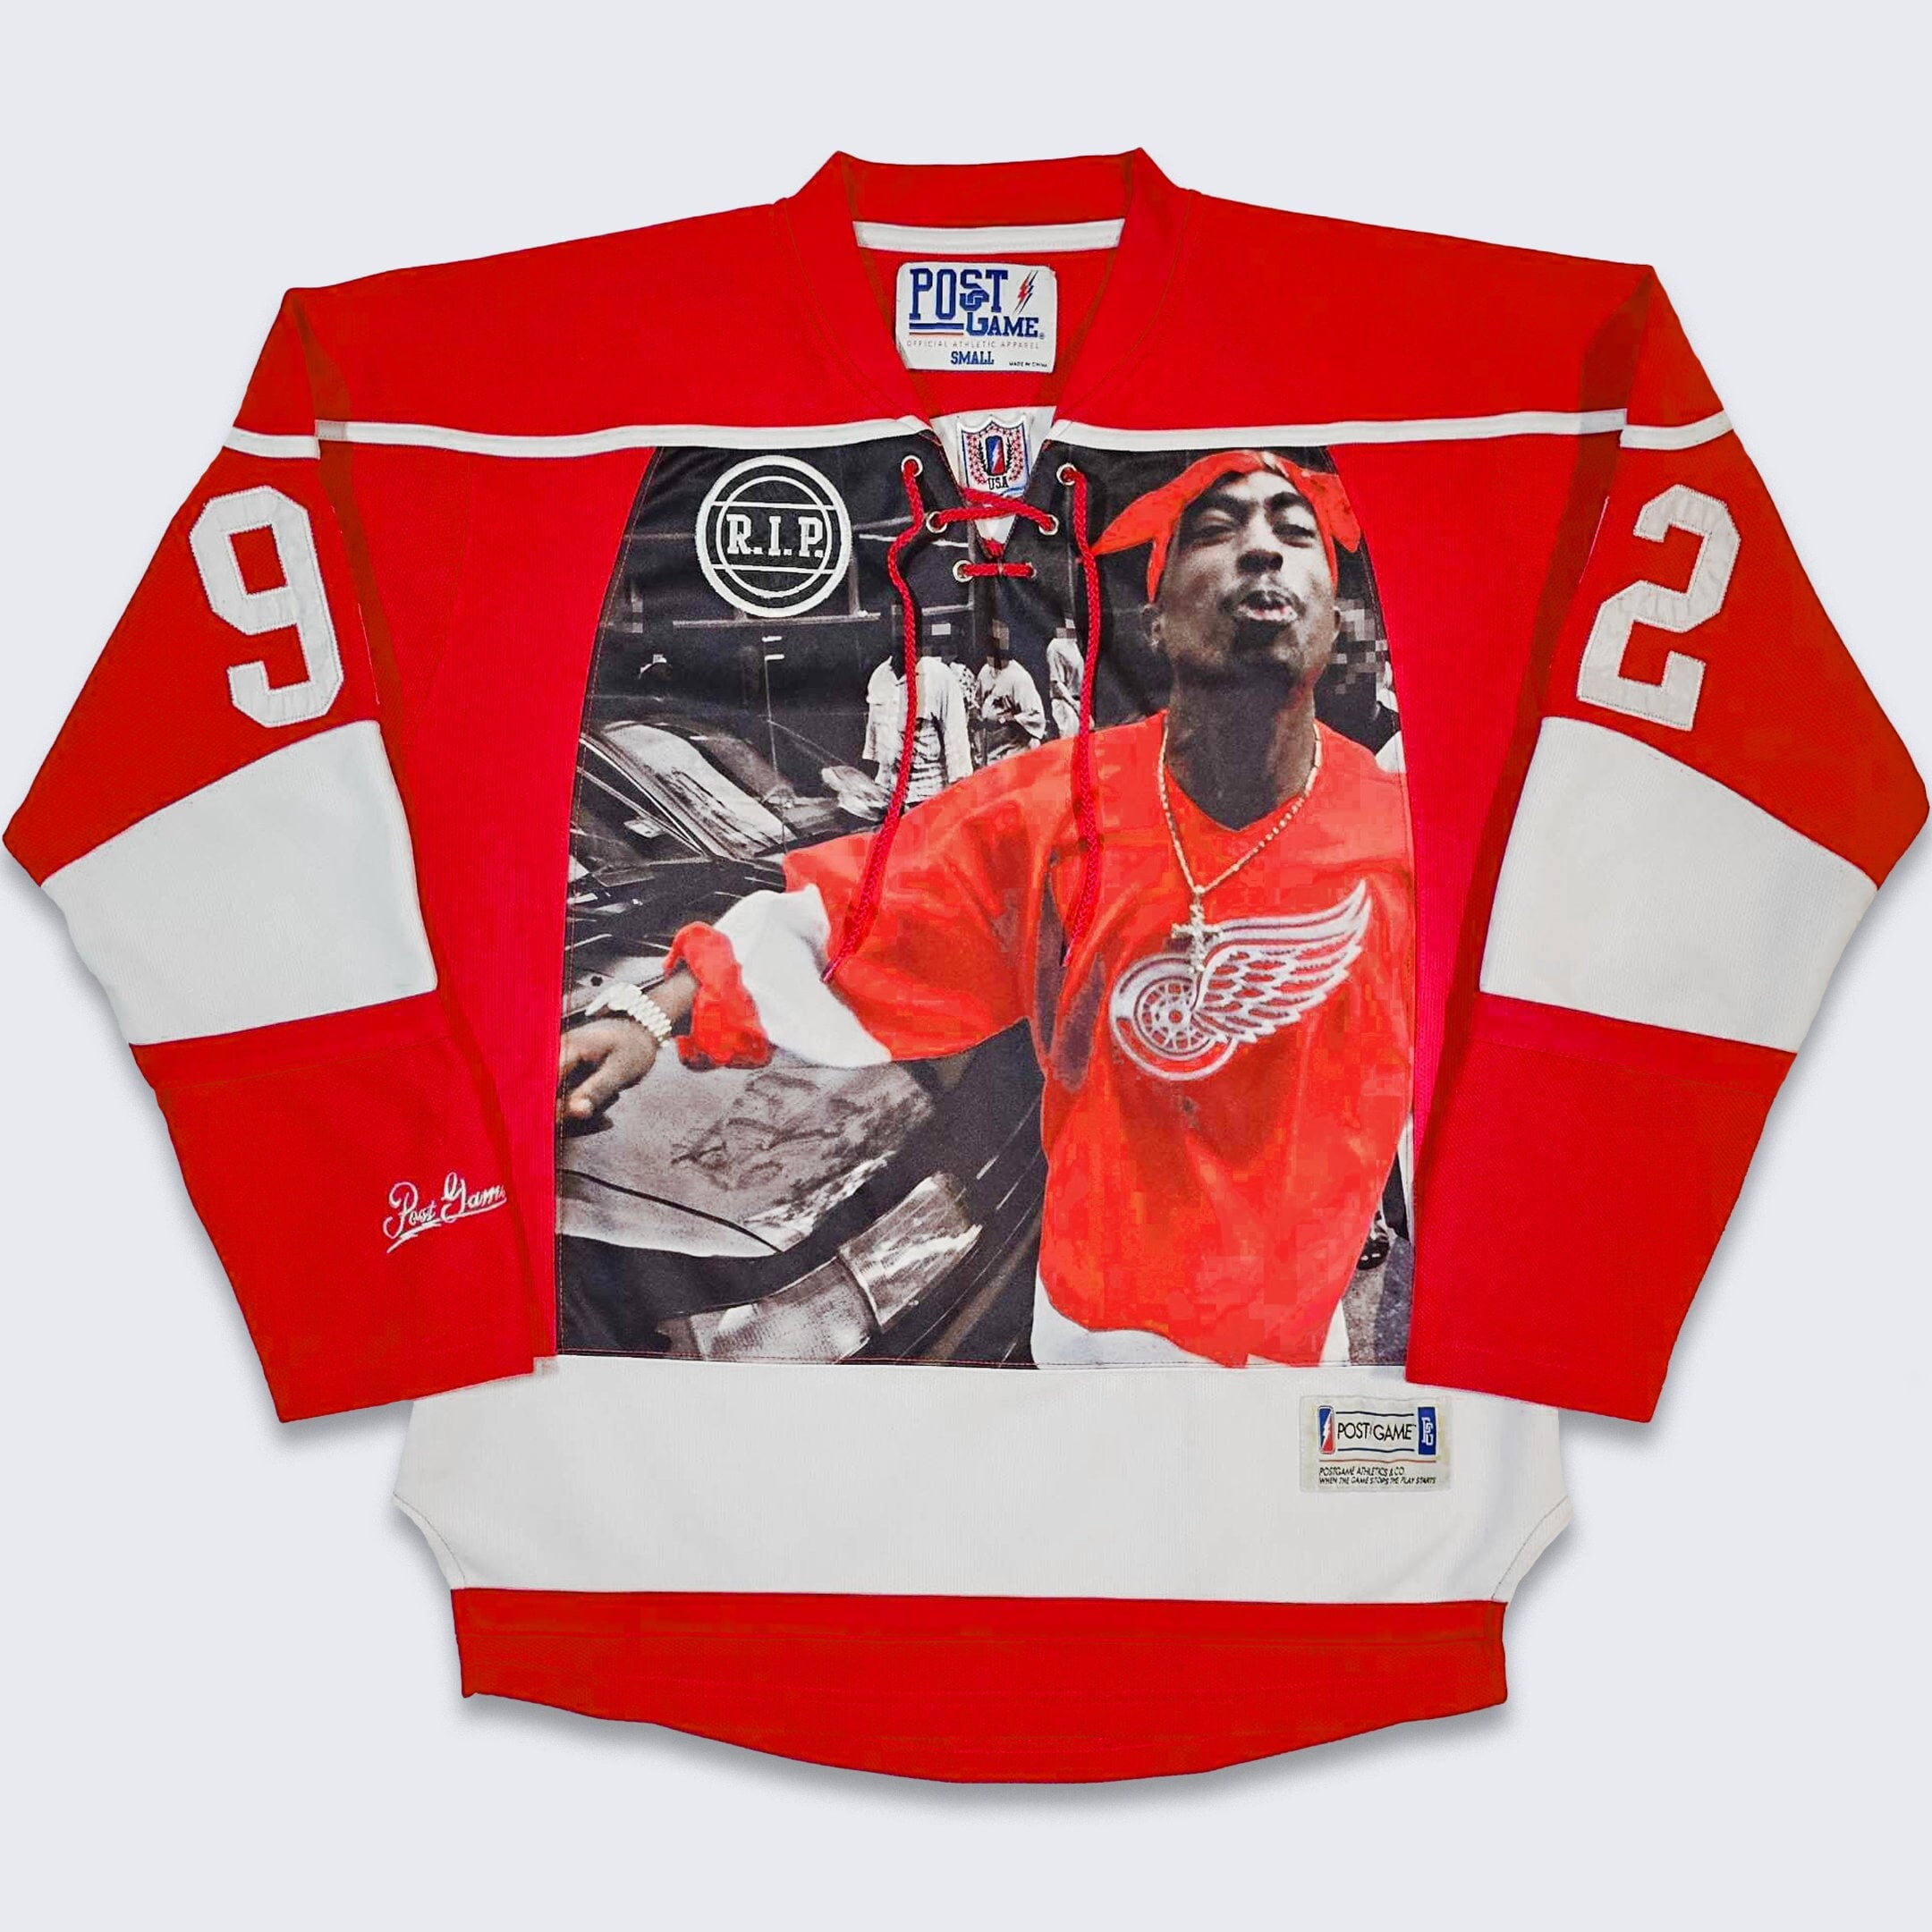 The troubling context around Tupac's infamous Red Wings jersey photo